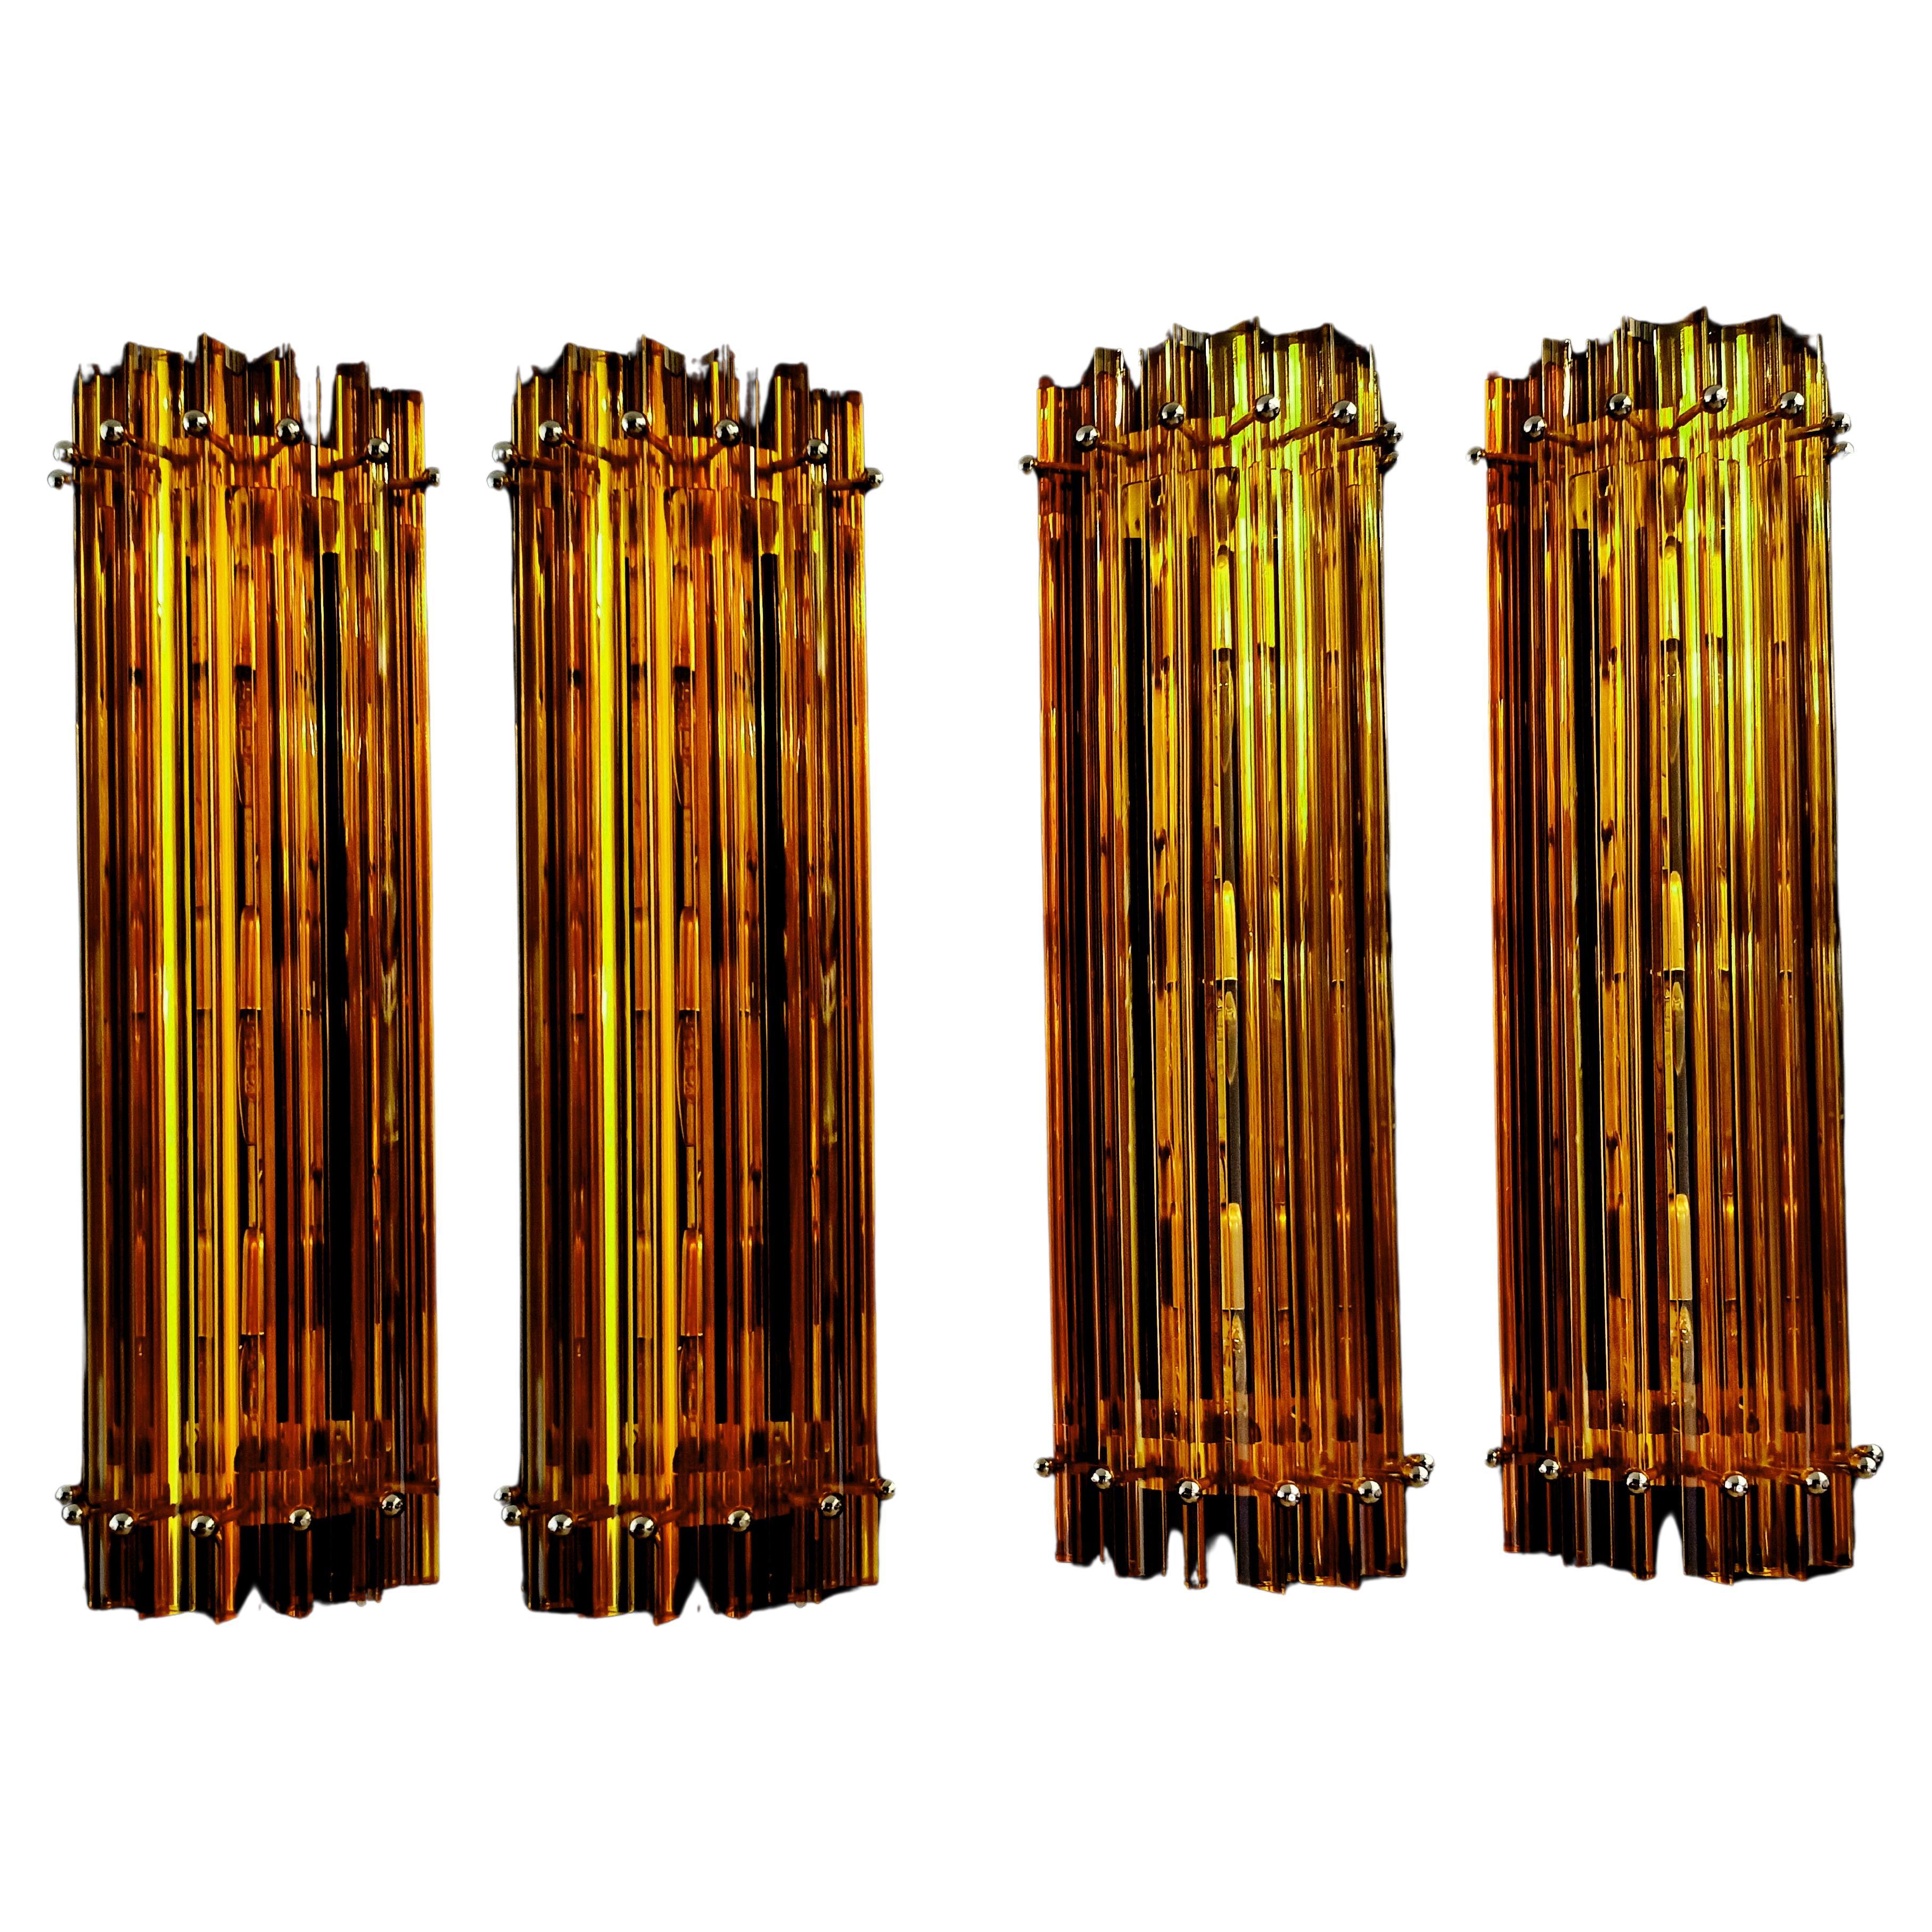 Pair Murano wall sconce, amber triedri, column Mariangela model
Fantastic Trio of vintage Murano wall sconce made by 6 Murano crystal prism (triedri) for each appliqué in a chrome metal frame. The shape of this sconce is column. The glasses are